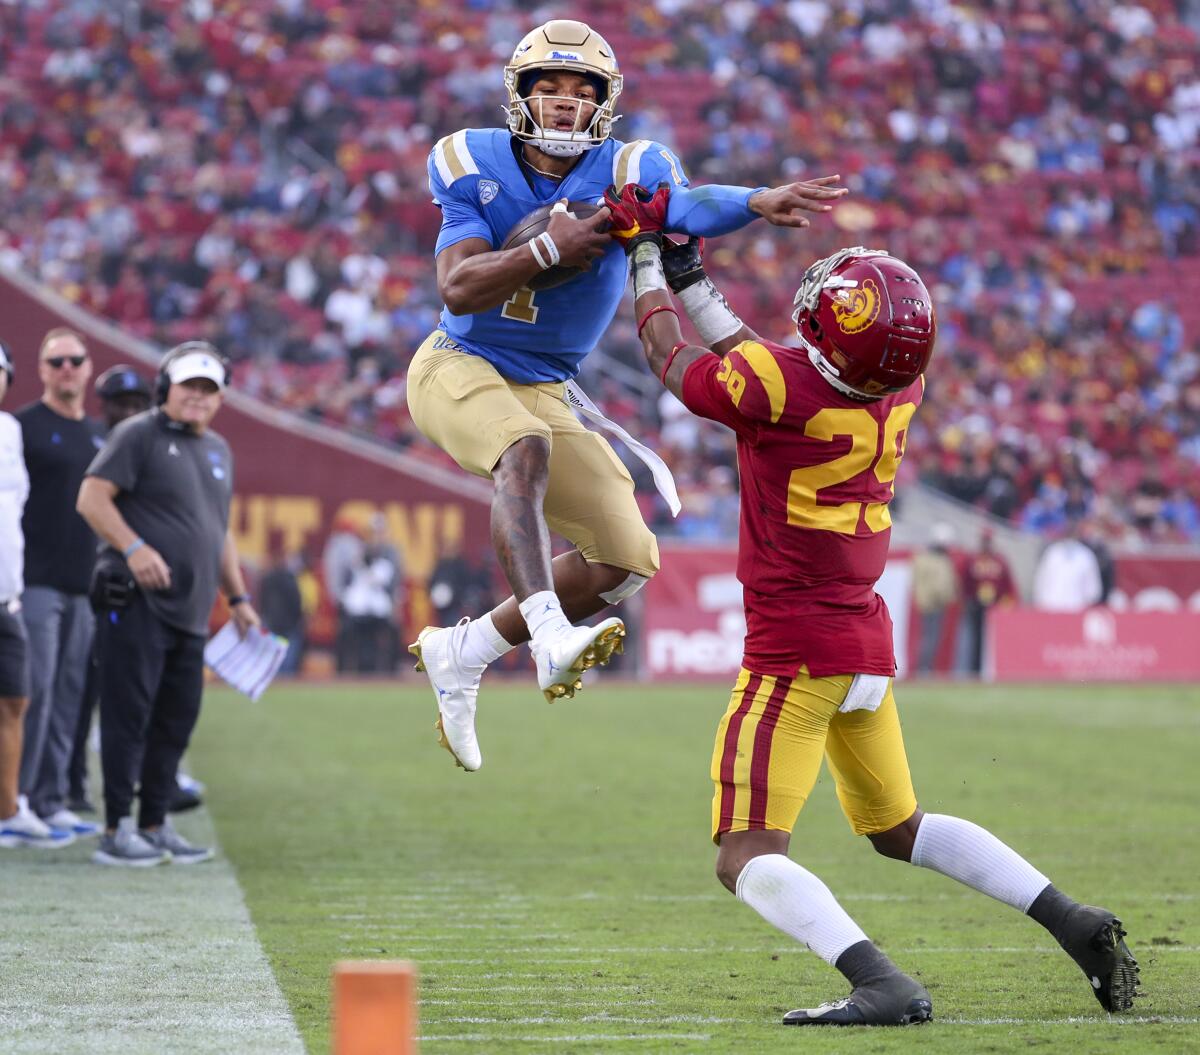 UCLA quarterback Dorian Thompson-Robinson leaps in an attempt to get past USC safety Xavion Alford